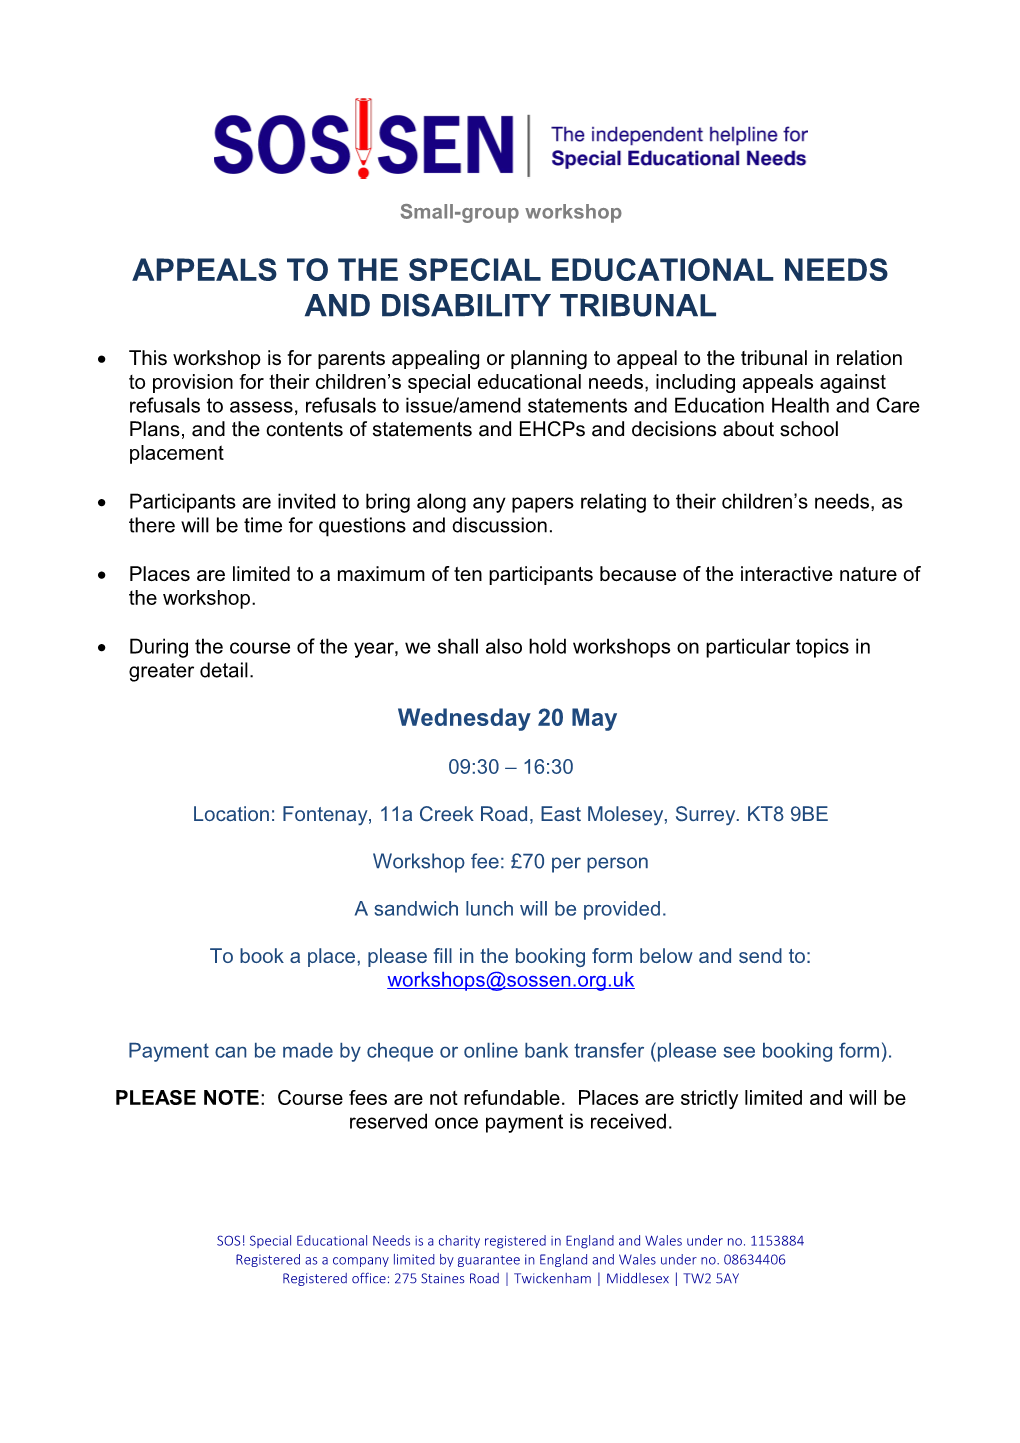 Appeals to the Special Educational Needs and Disability Tribunal